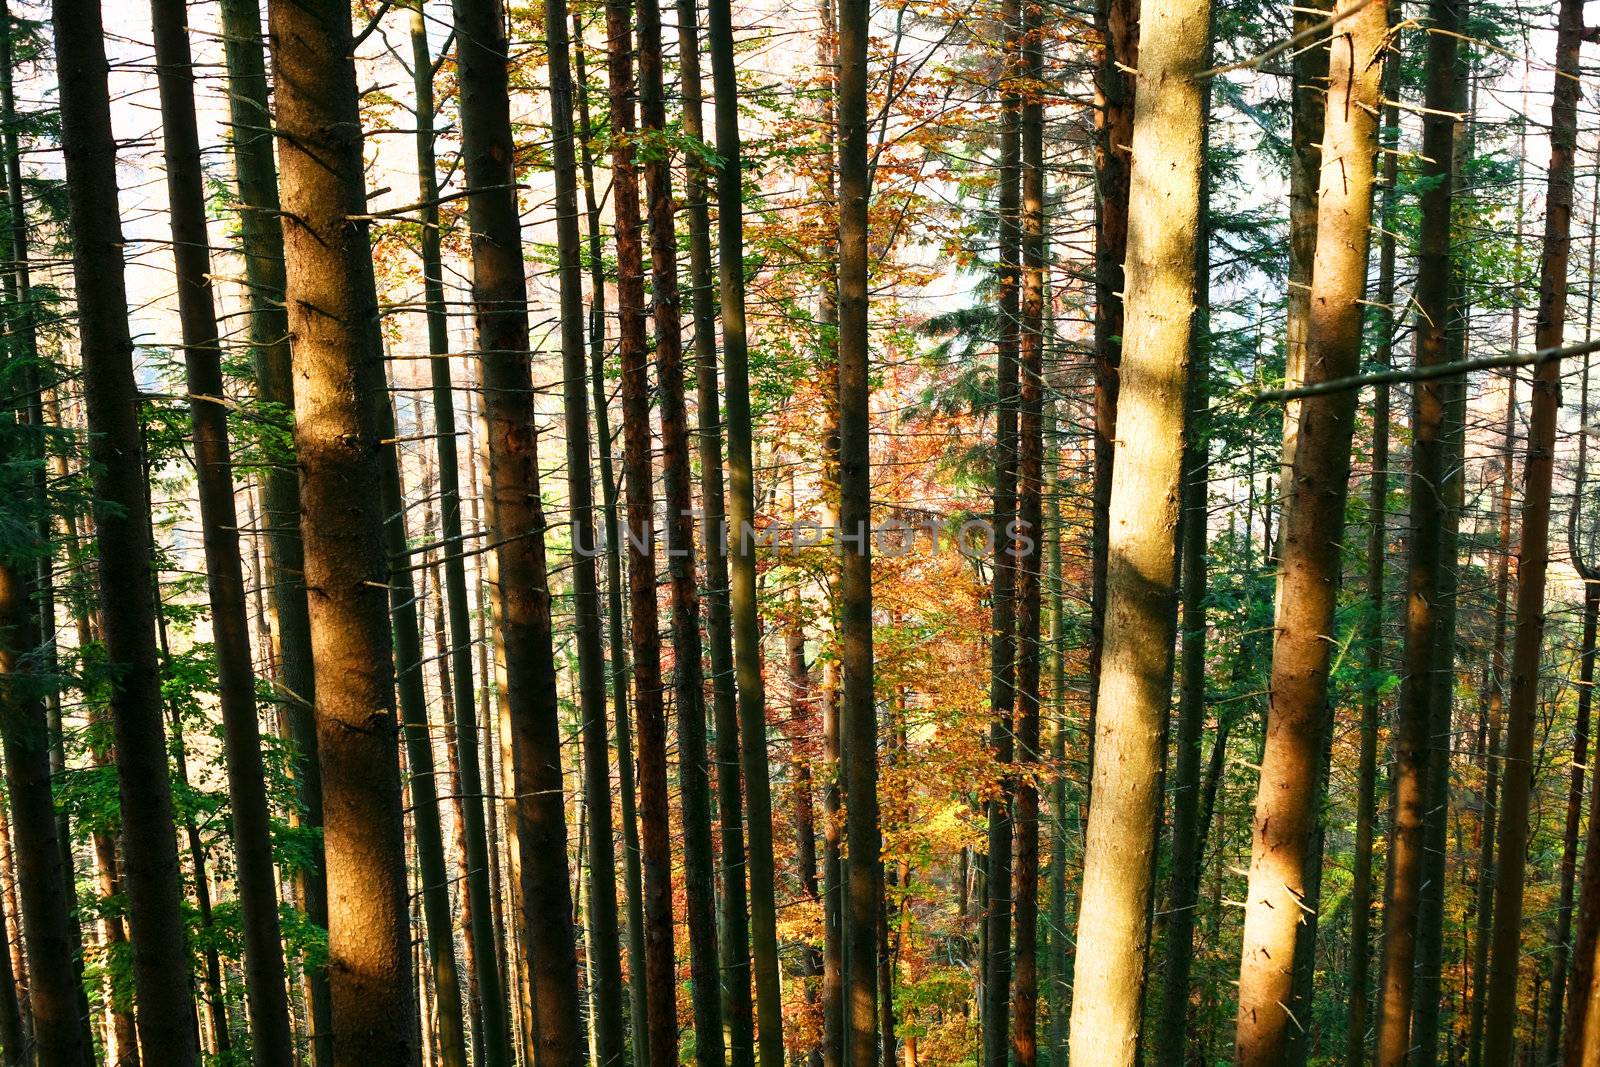 An image of a trees in autumn forest